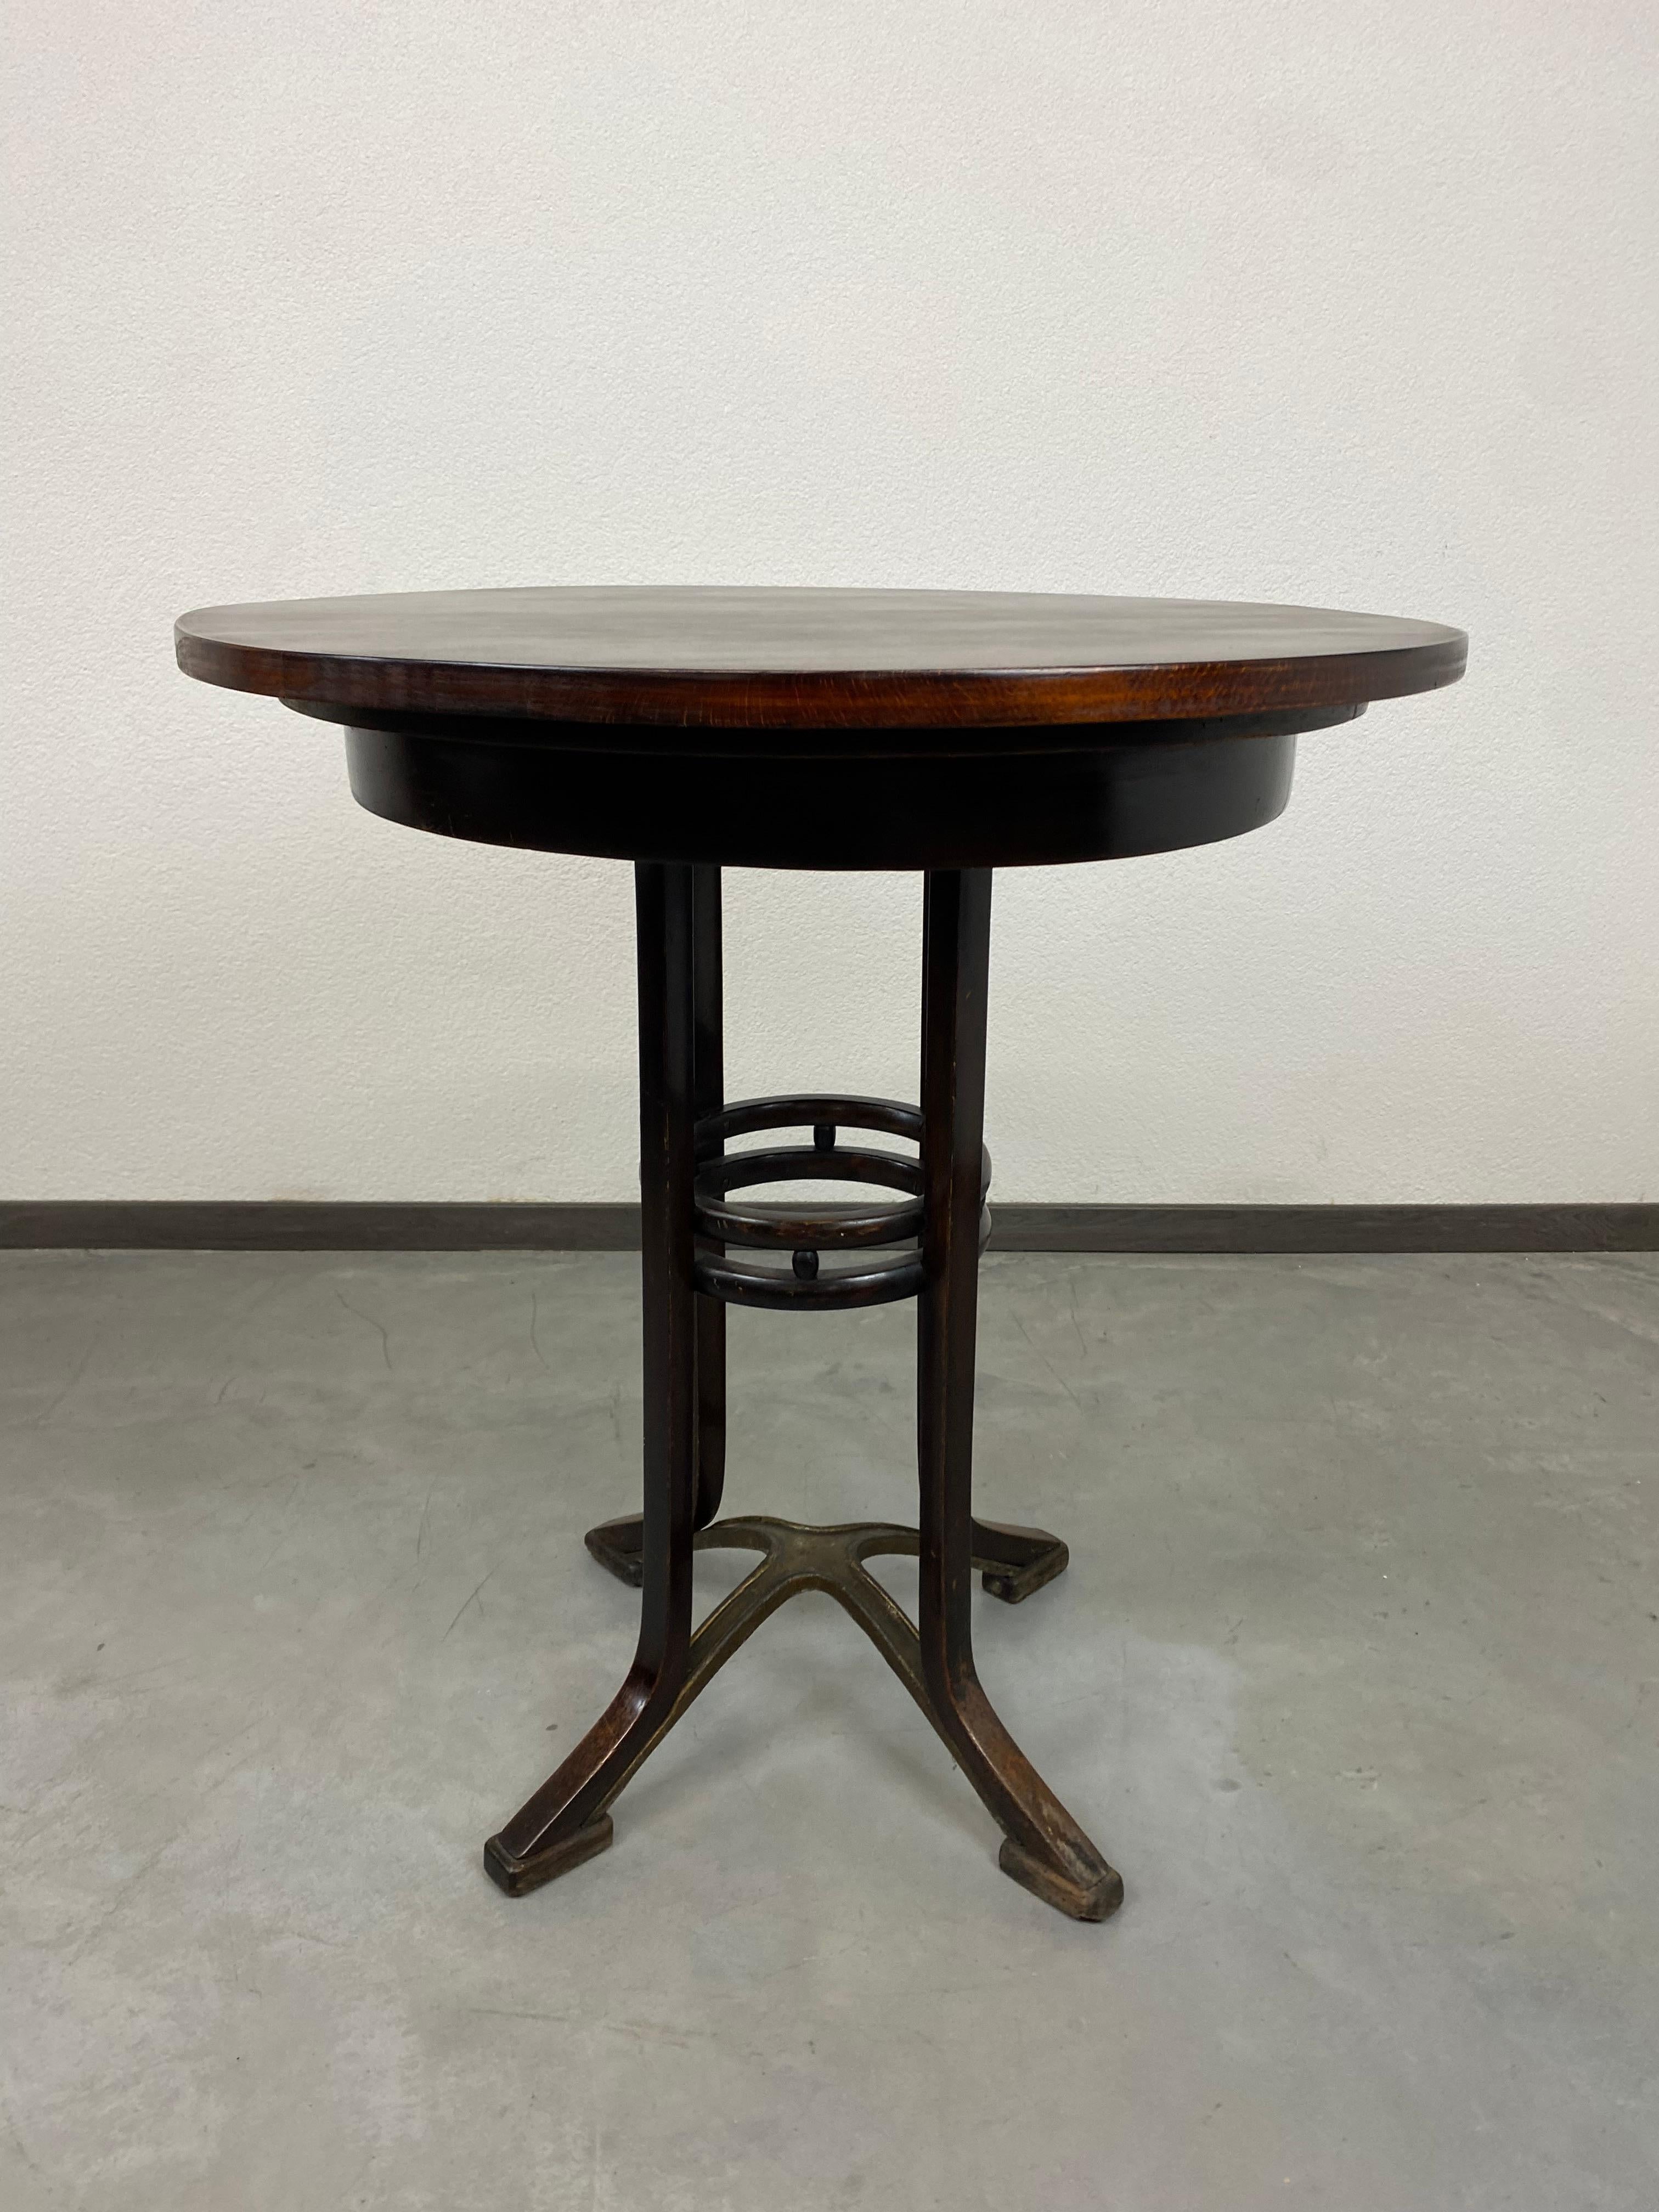 Vienna Secession Thonet Table by Josef Hoffmann For Sale